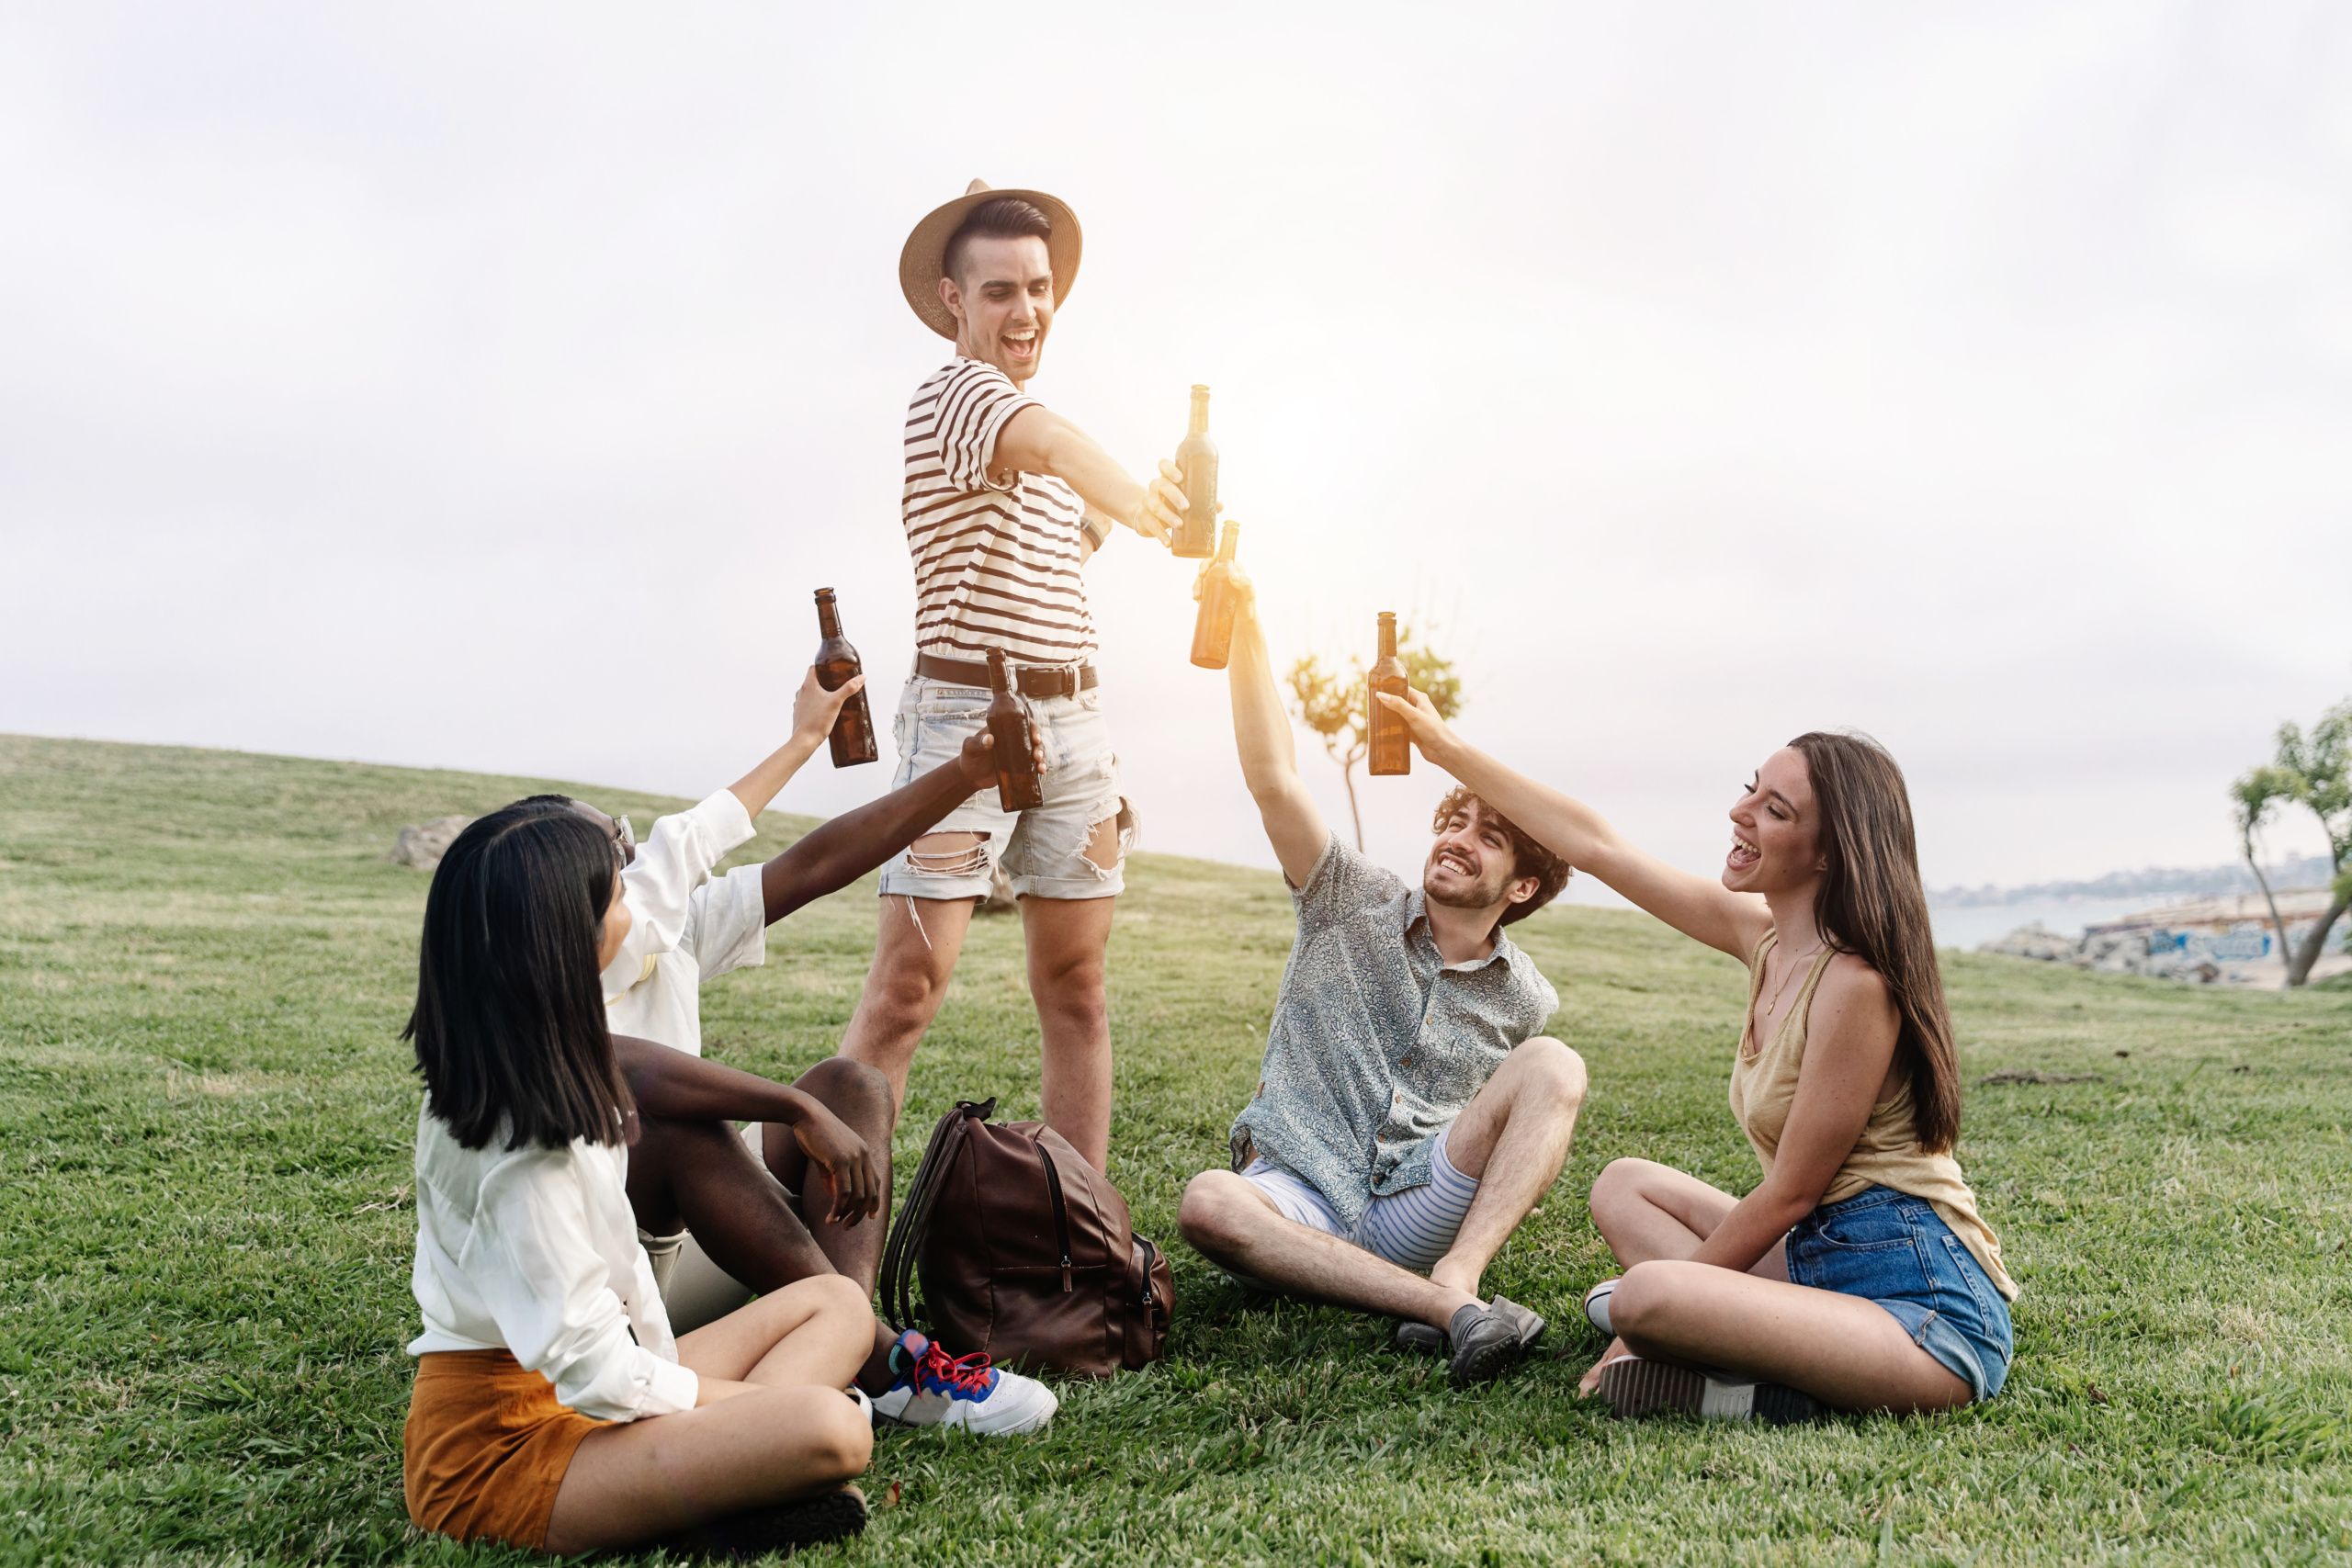 Friends toasting beer in public park to celebrate summer vacations and friendship